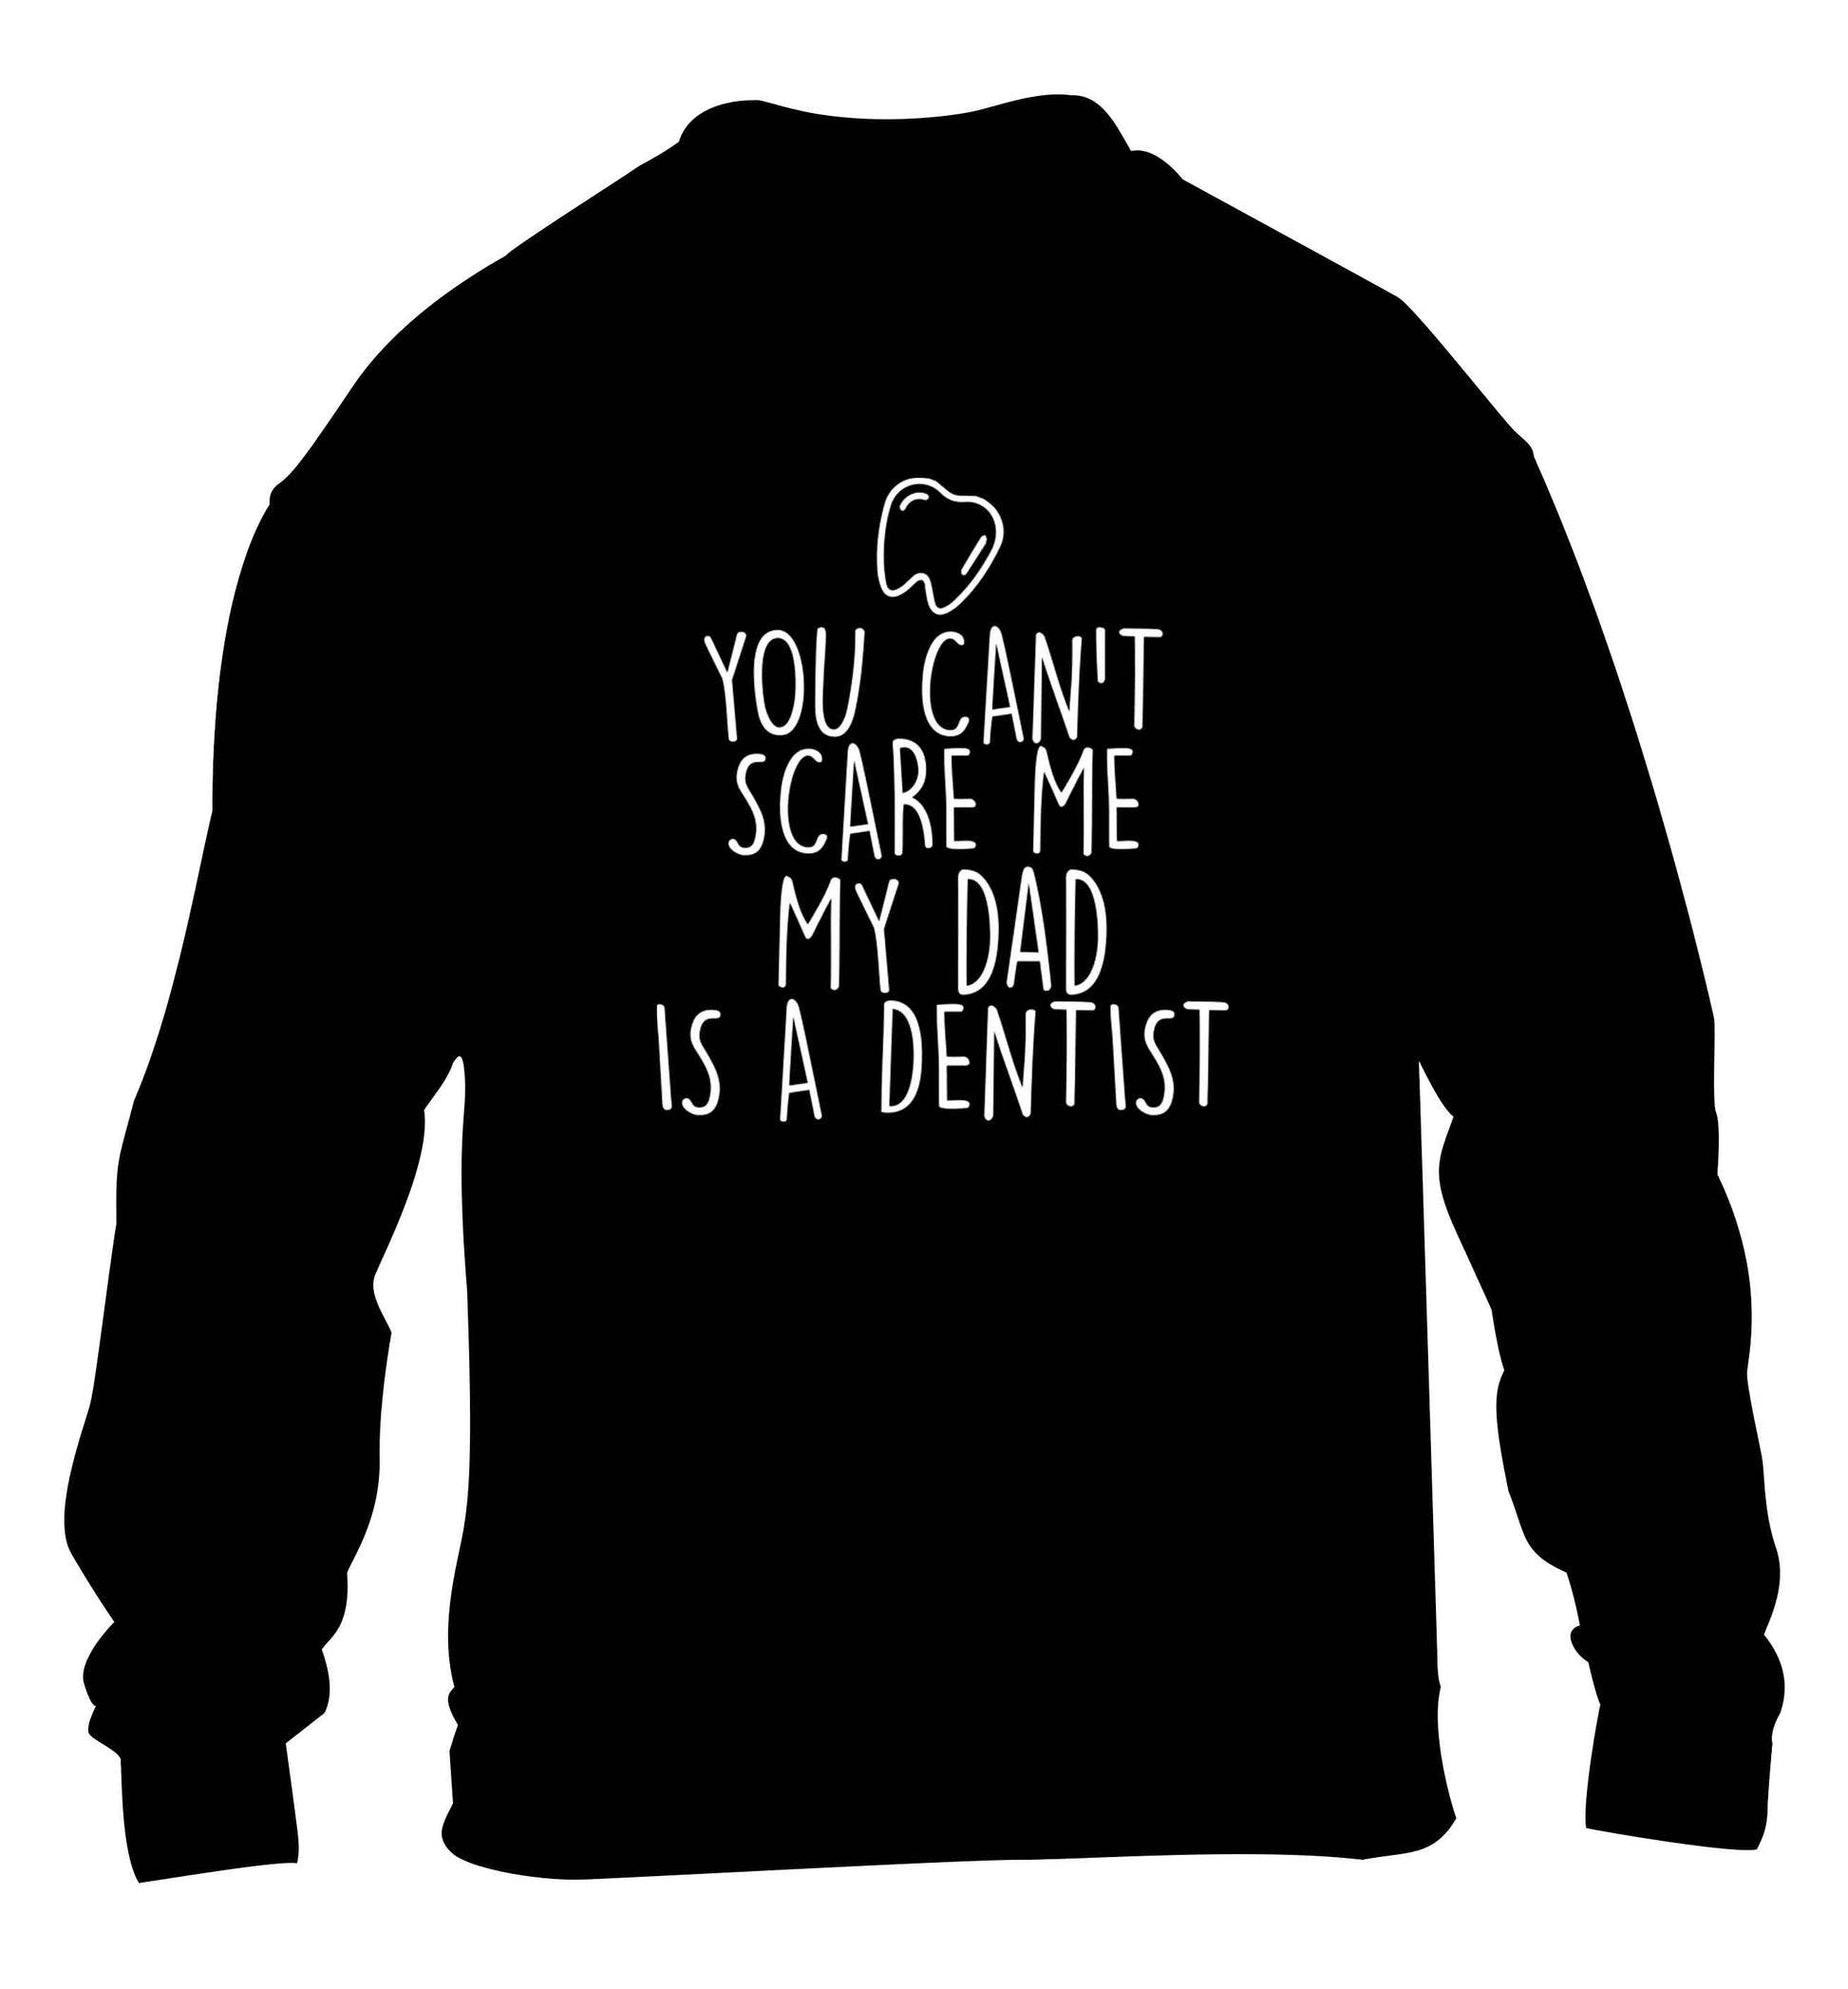 You can't scare me my dad is a dentist children's black sweater 12-13 Years